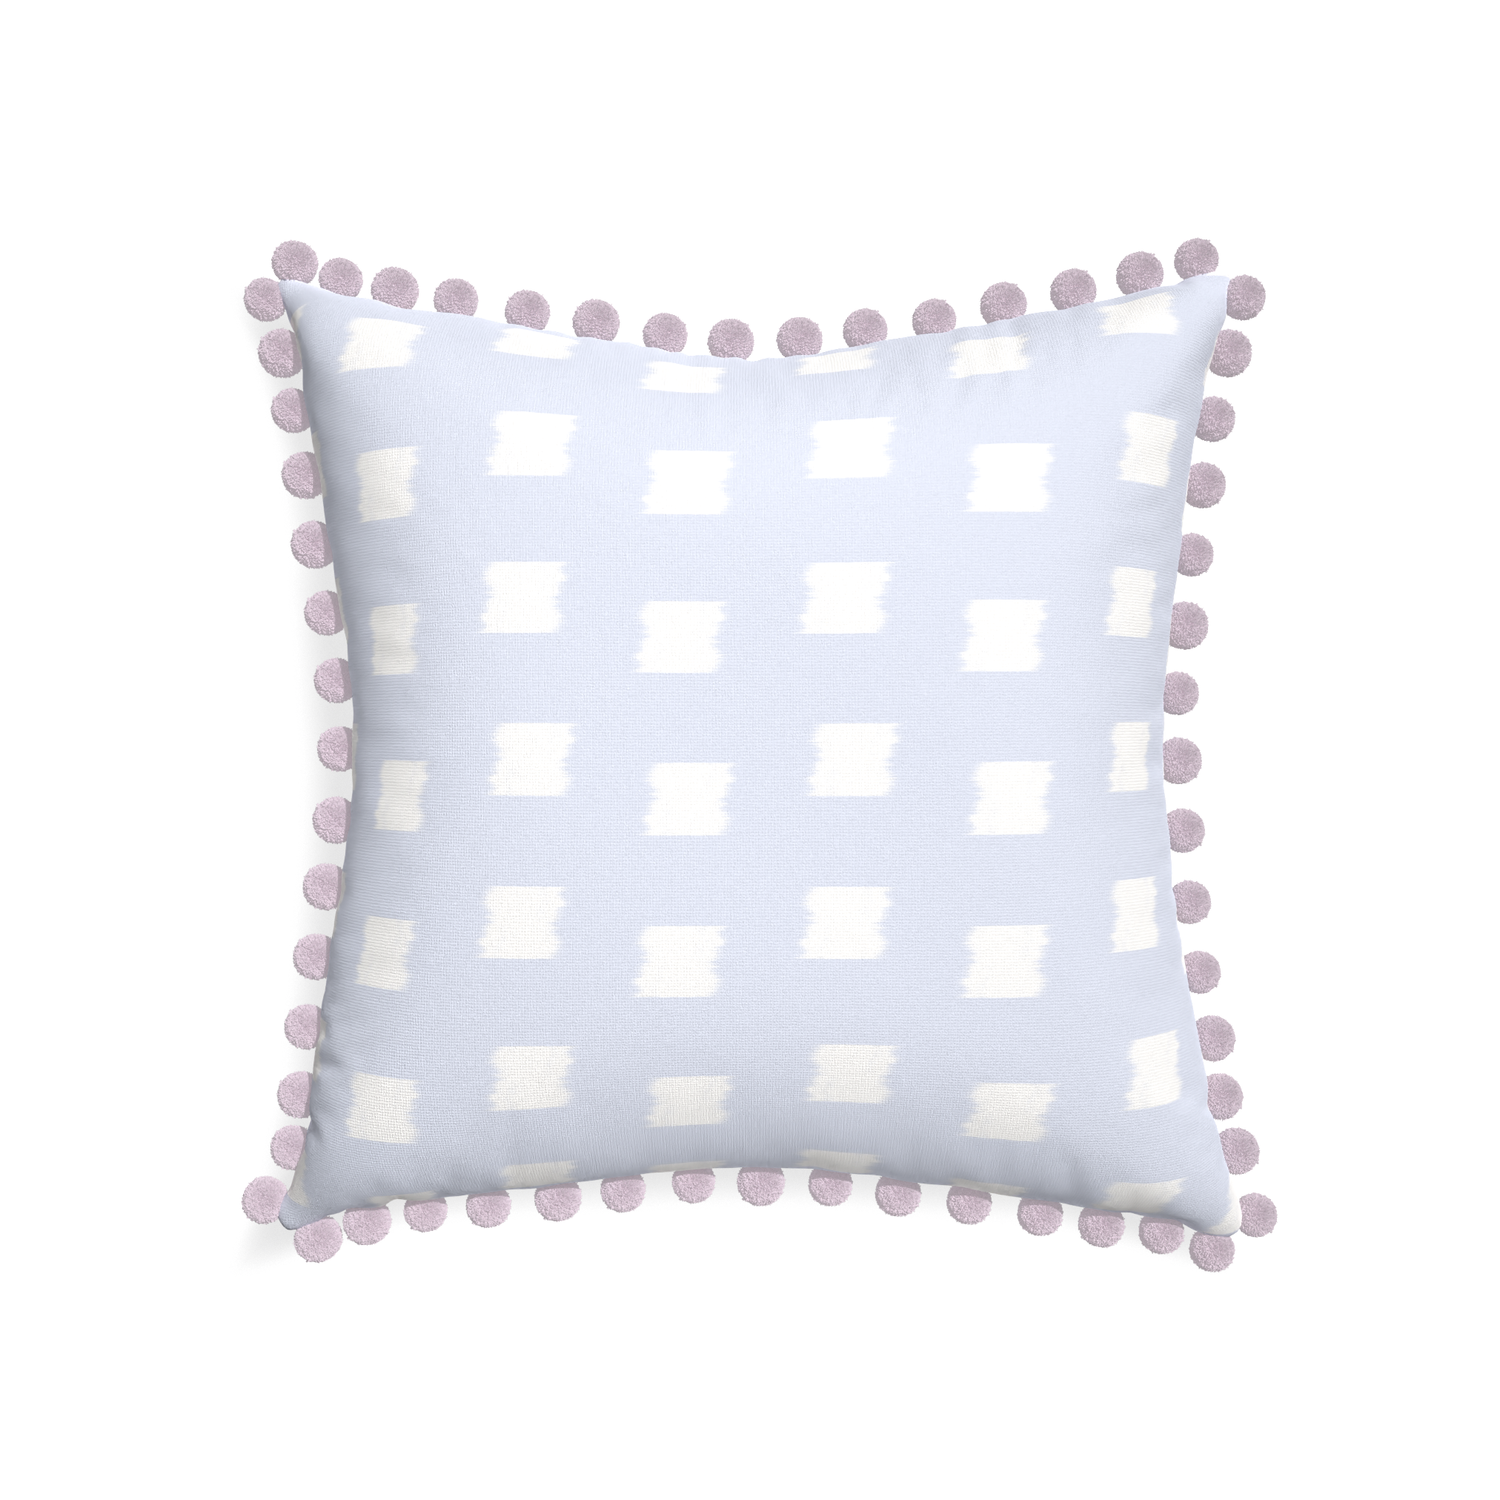 22-square denton custom sky blue patternpillow with l on white background